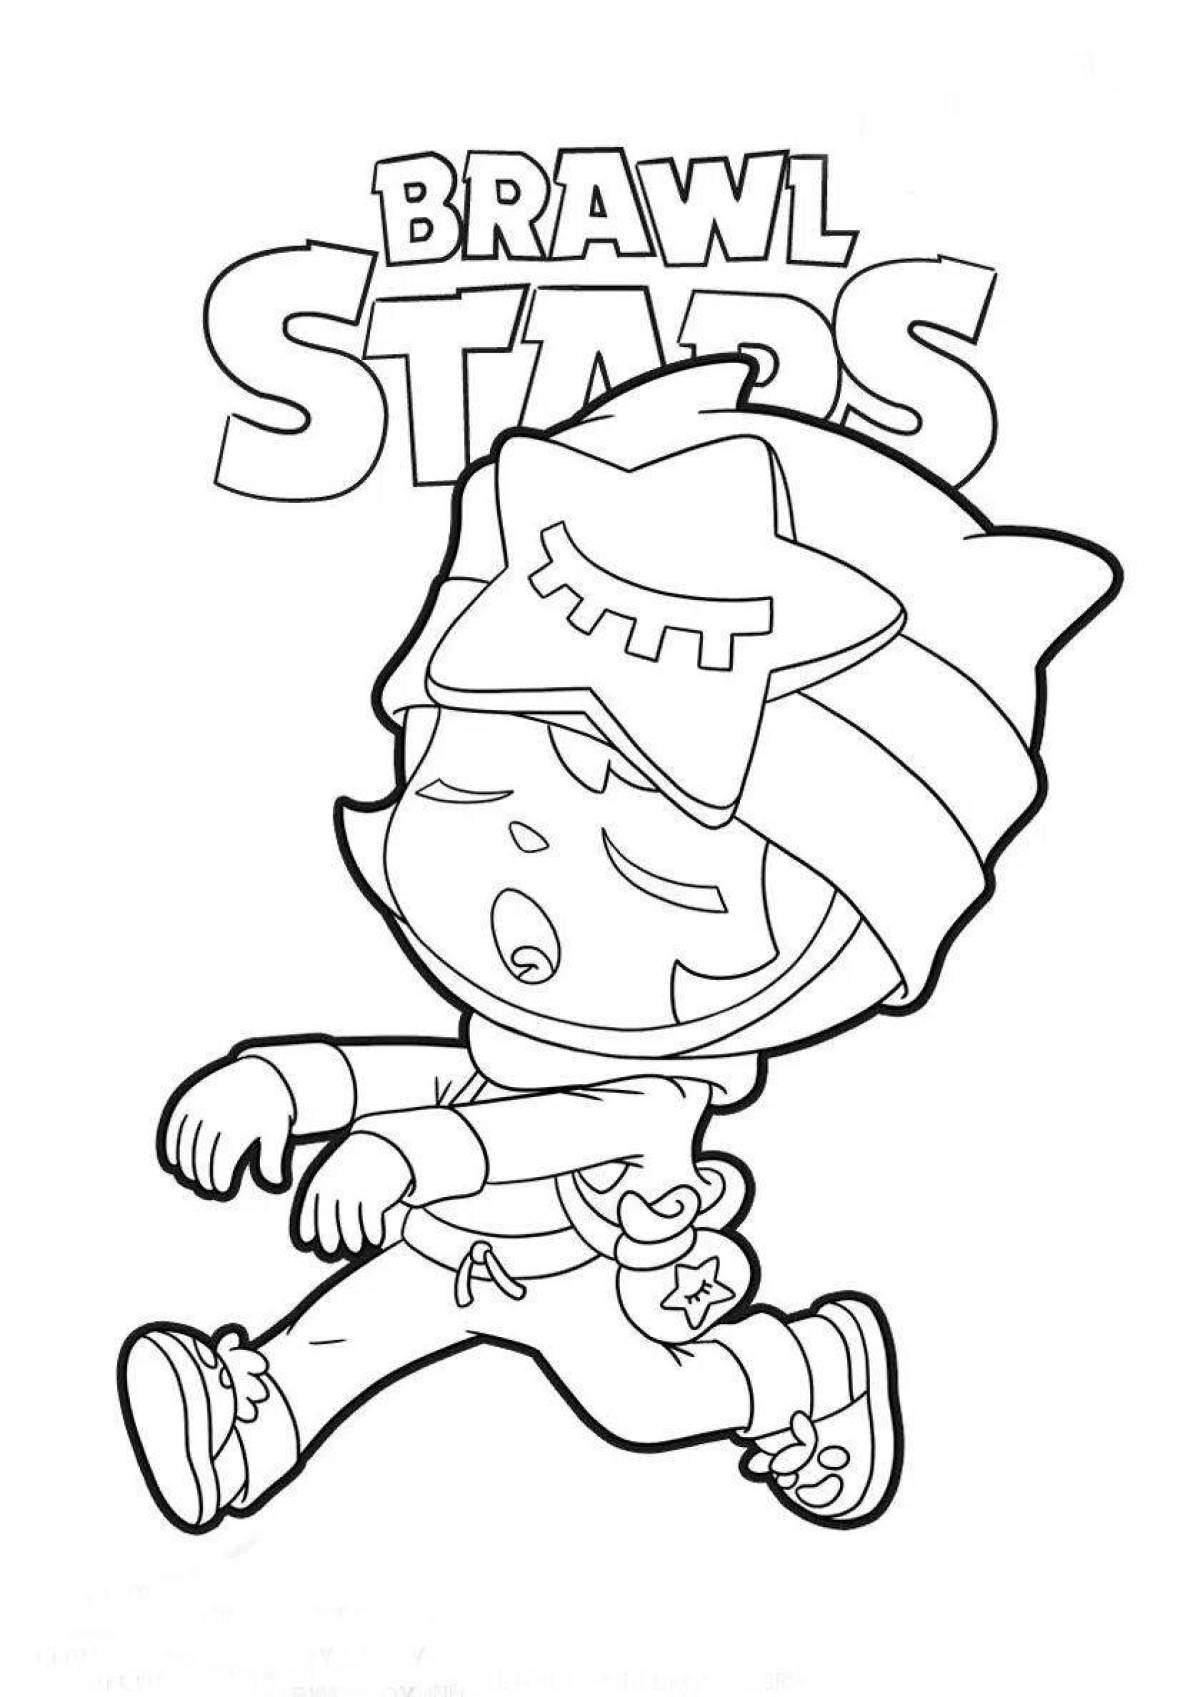 Fine brown stars coloring page